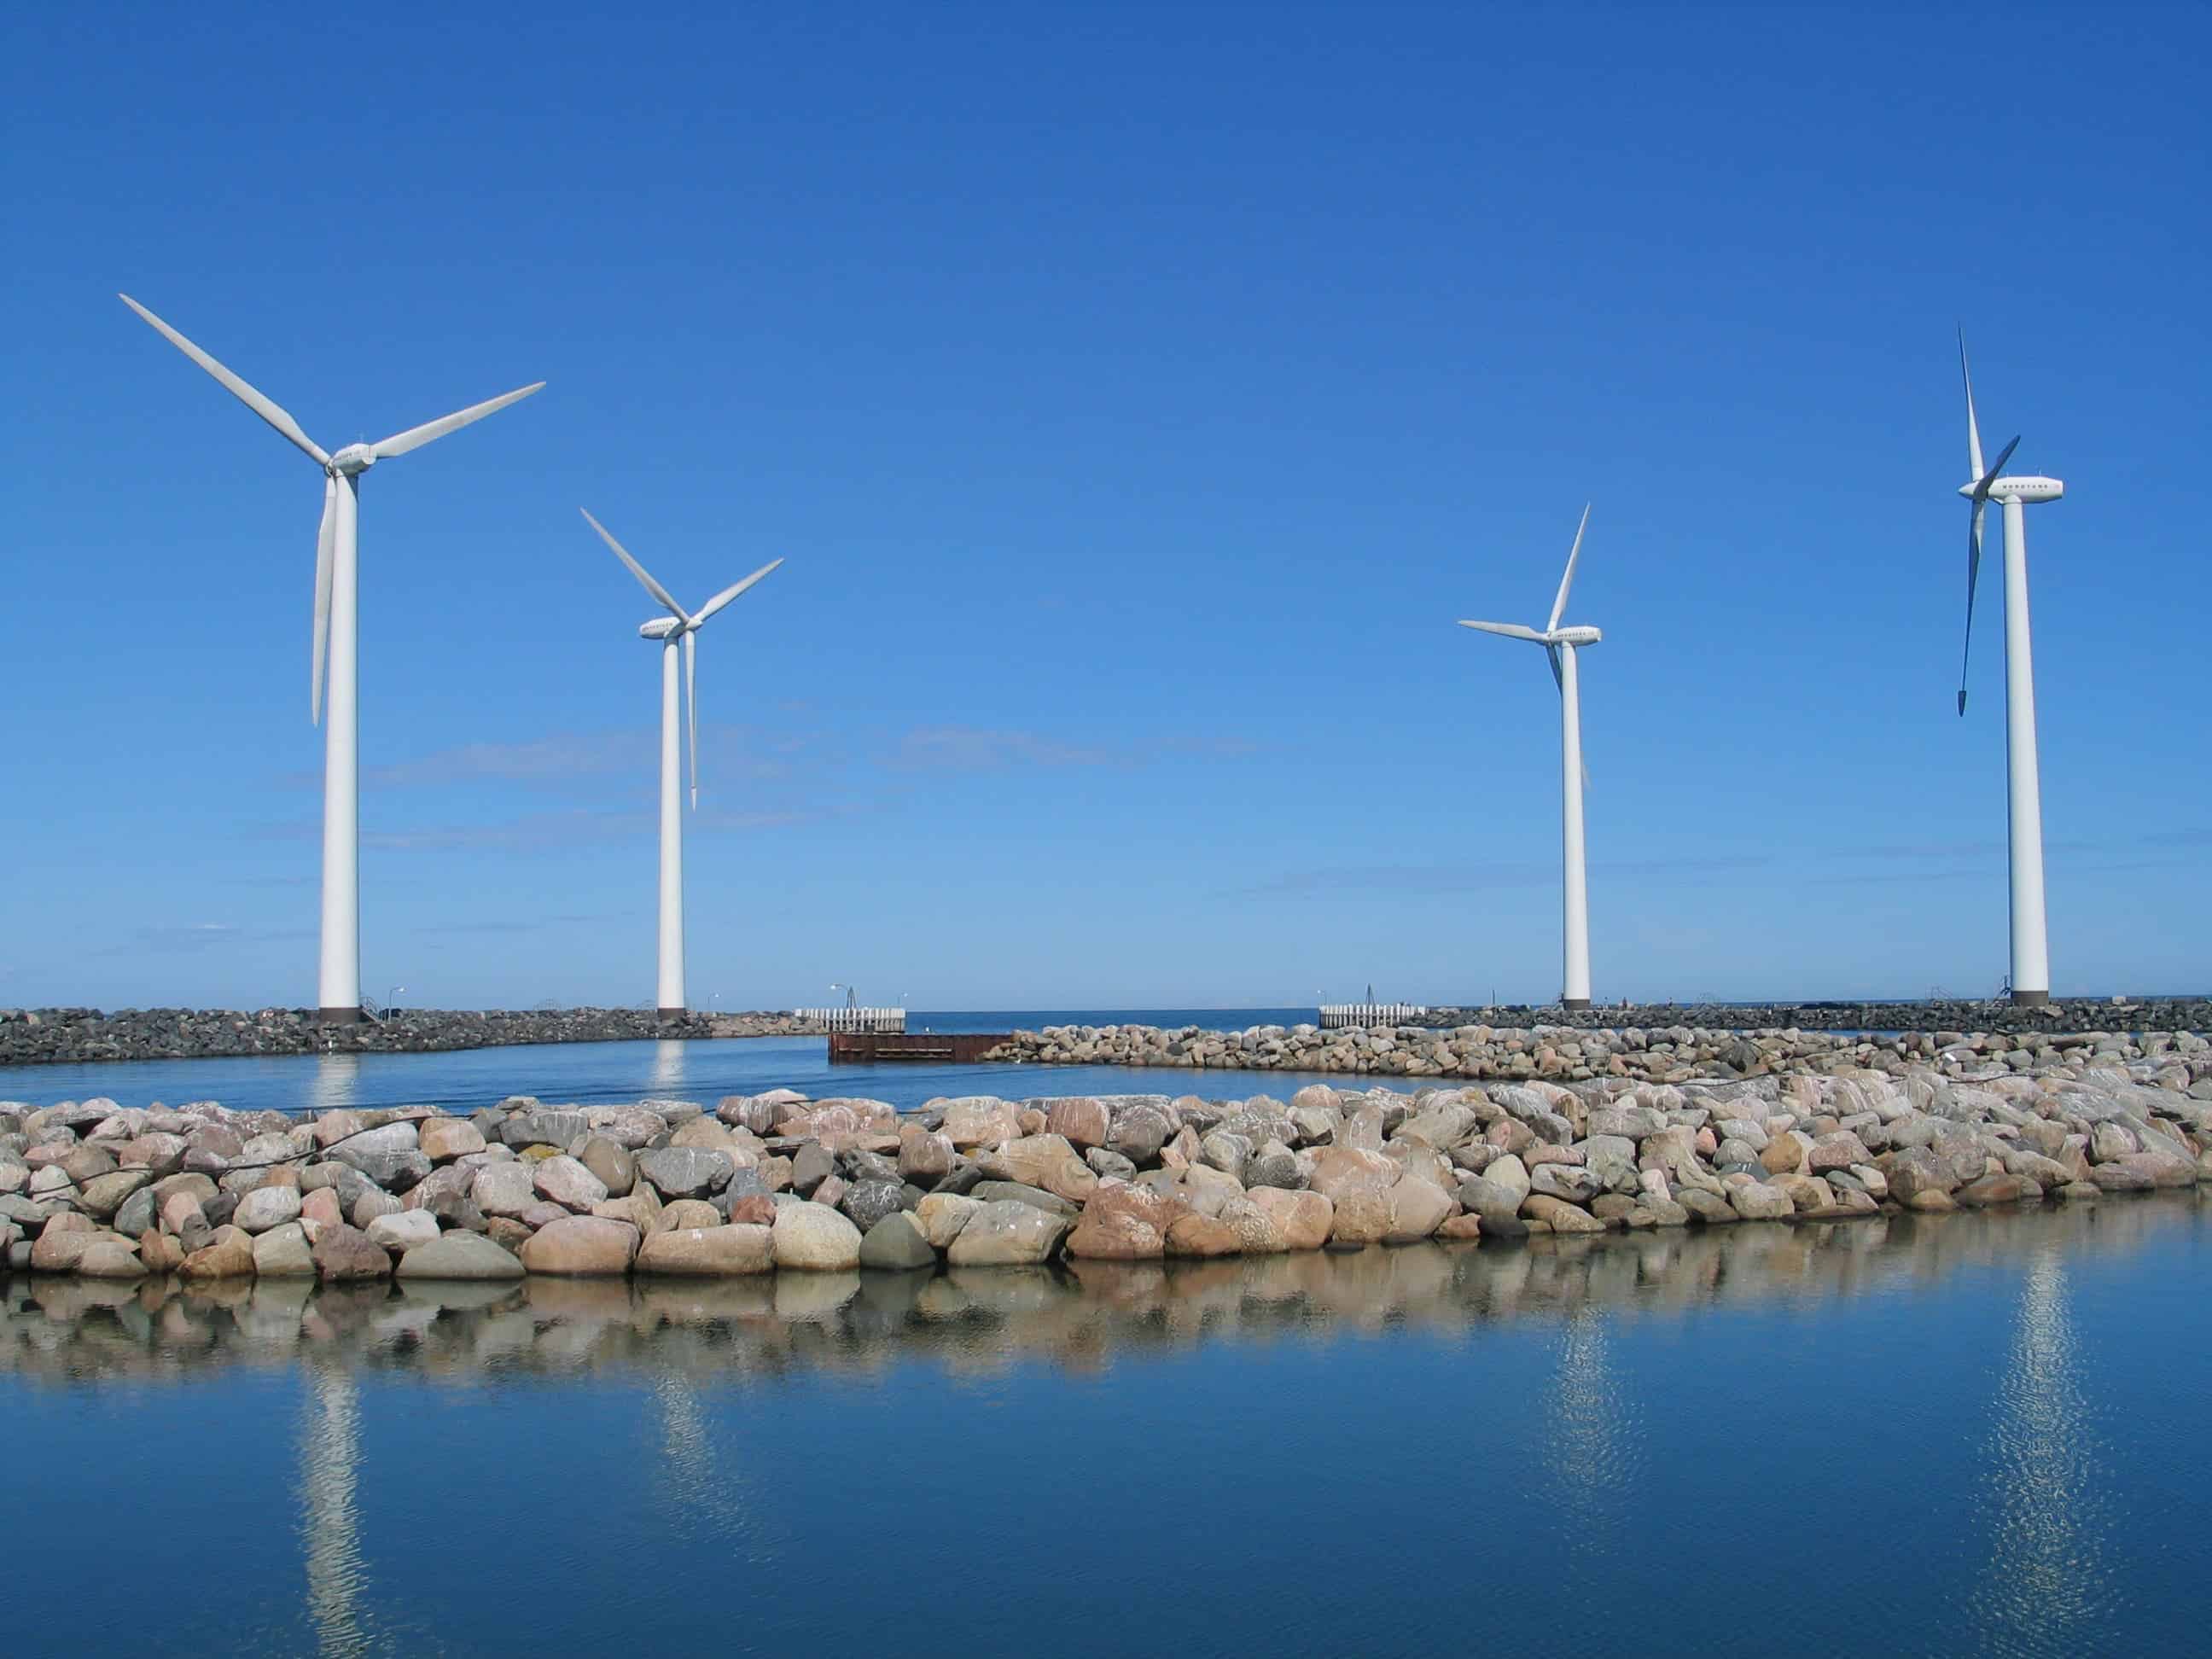 Windmills at the shore of Denmark at Bønnerup Strand. Image credits: Dirk Goldhahn